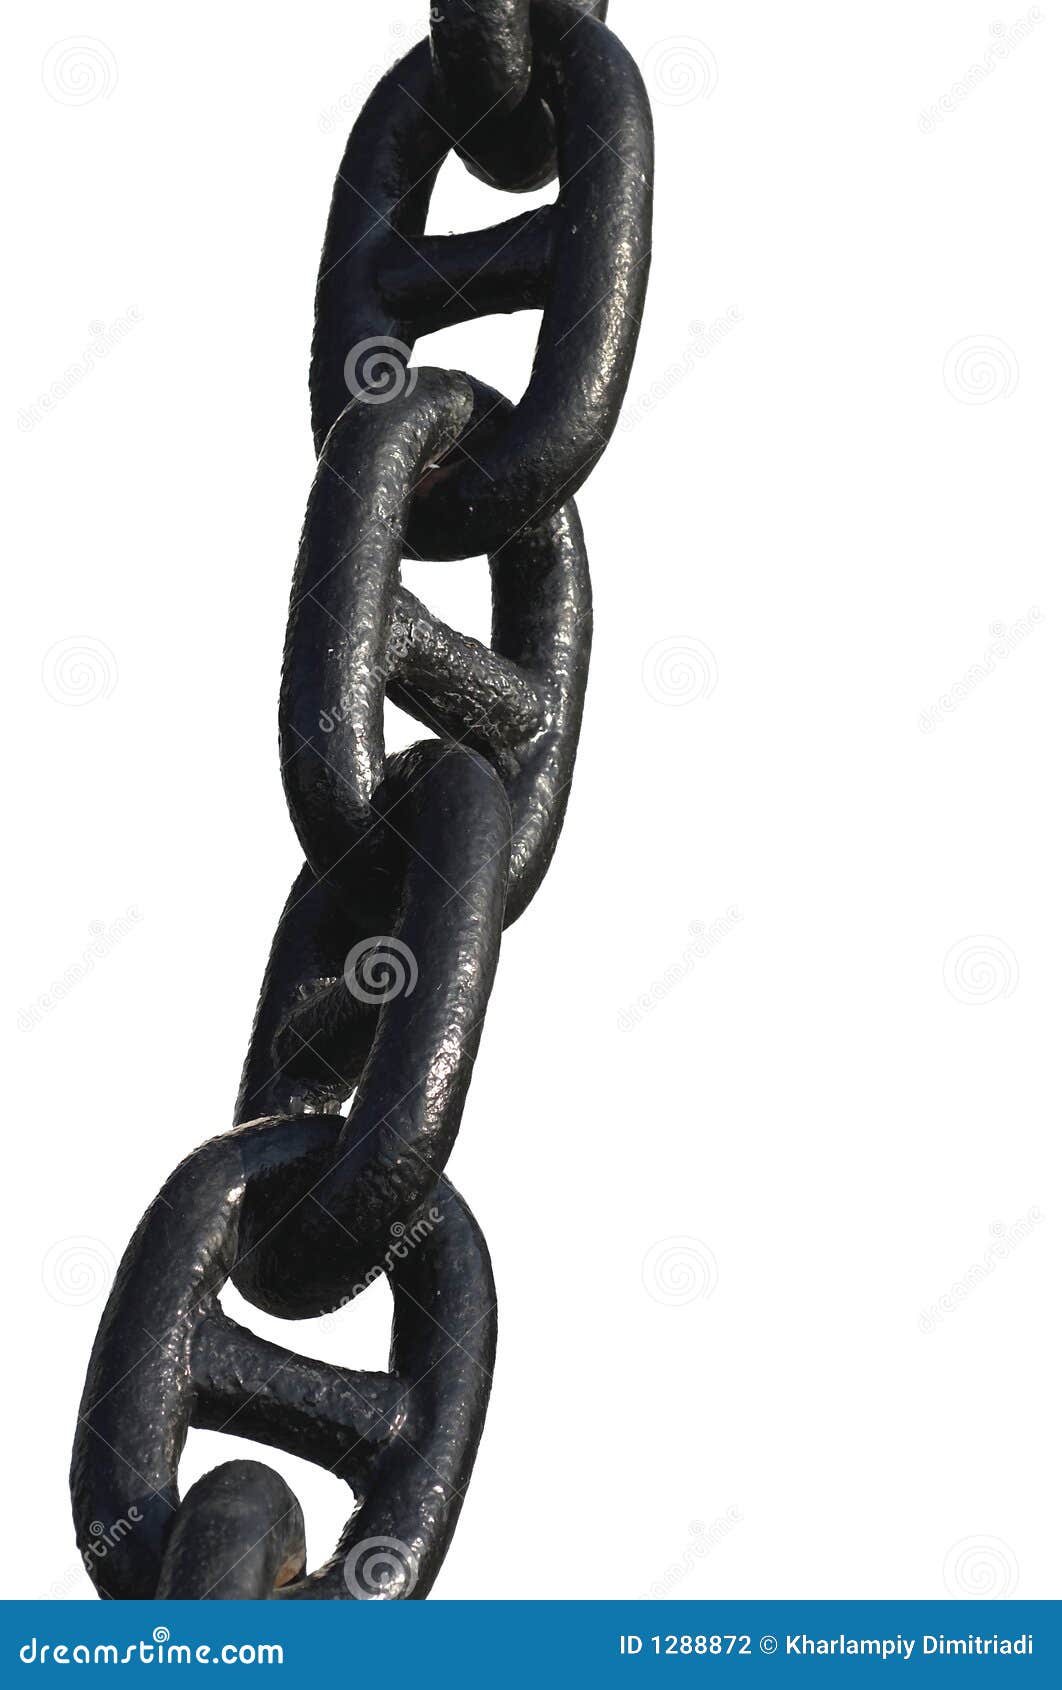 Anchor chain stock photo. Image of build, vessel, hanging - 1288872